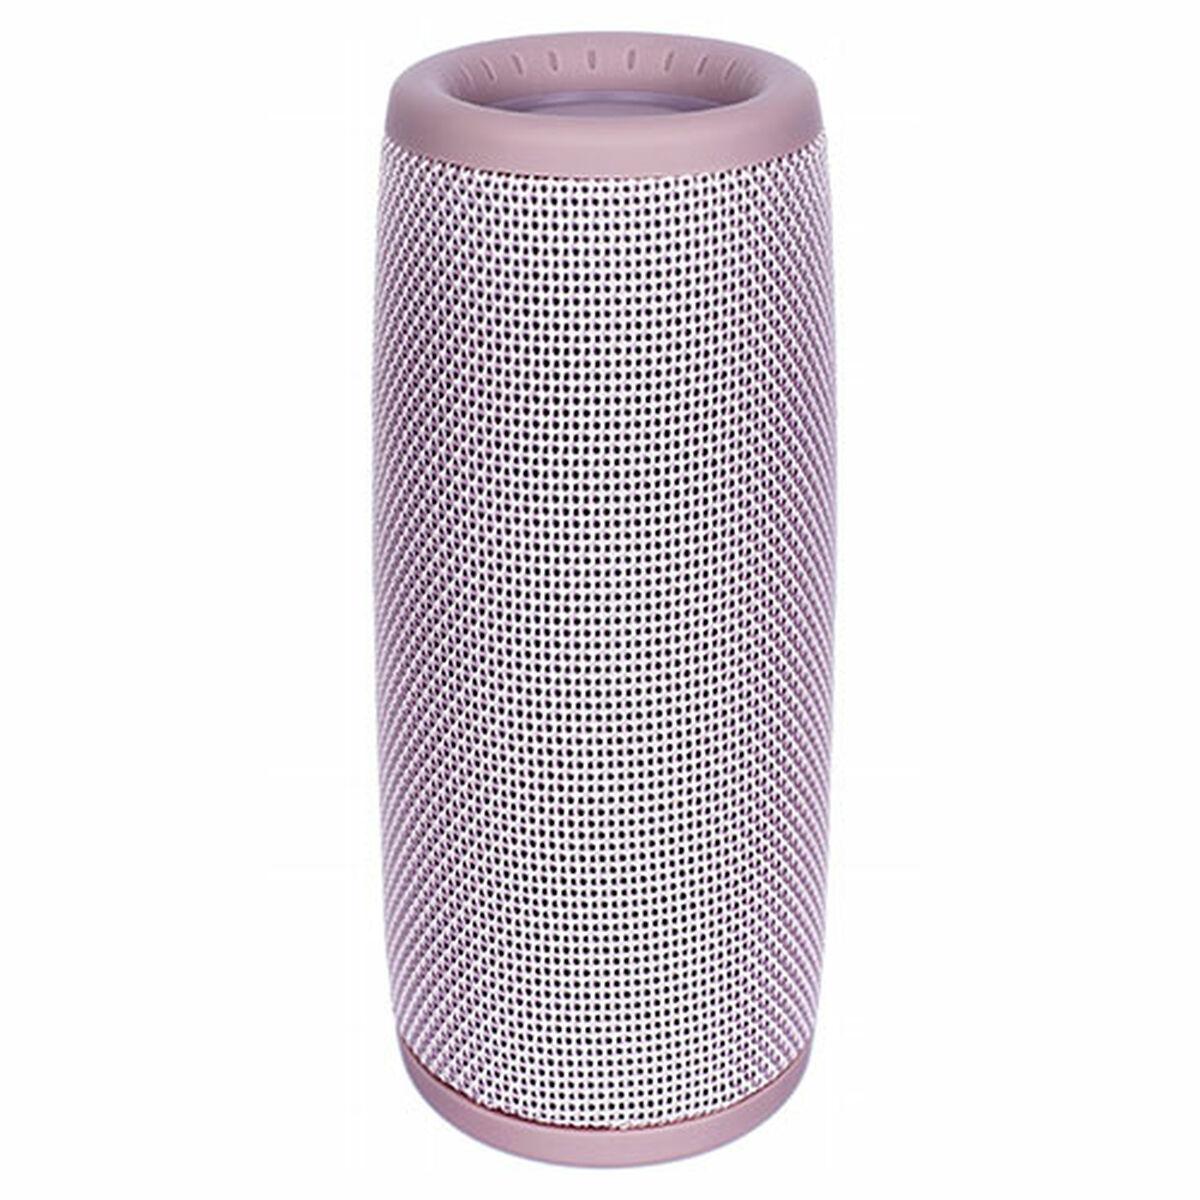 Denver BTV-150RO Bluetooth speaker with built-in rechargeable battery & USB/MicroSD card slot pink